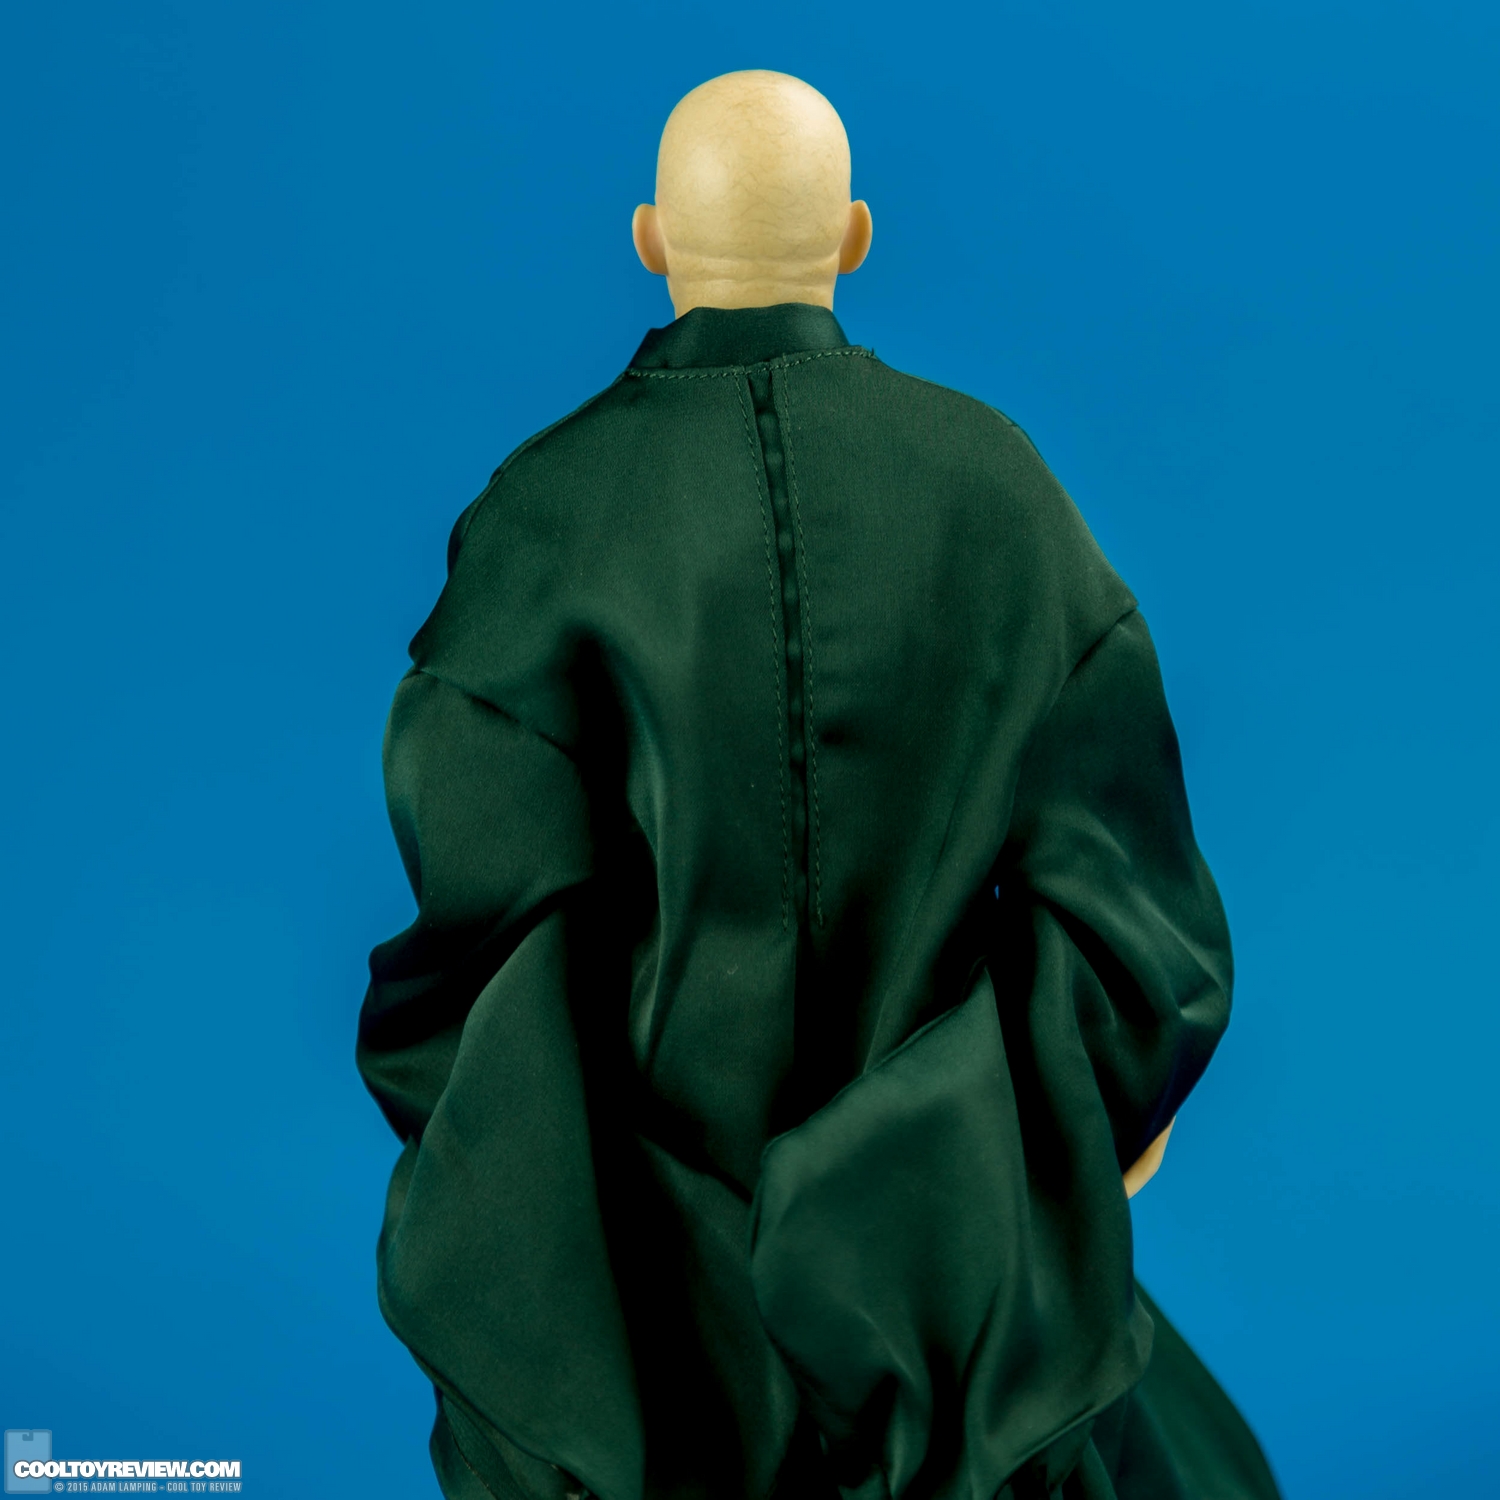 star-ace-toys-harry-potter-voldemort-sixth-scale-figure-009.jpg